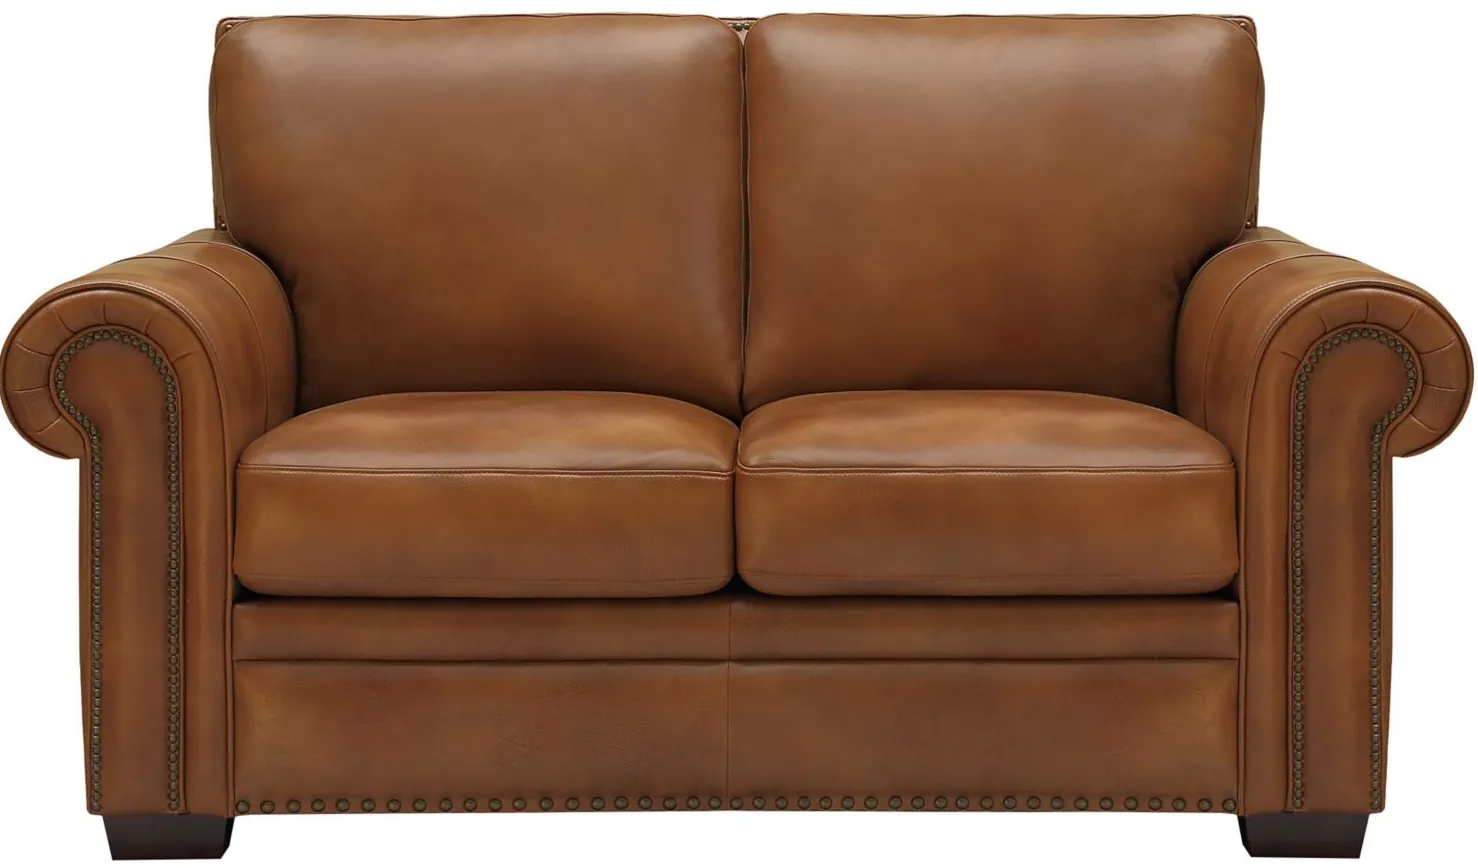 Rocco Leather Loveseat in Tan by GTR Leather Inc